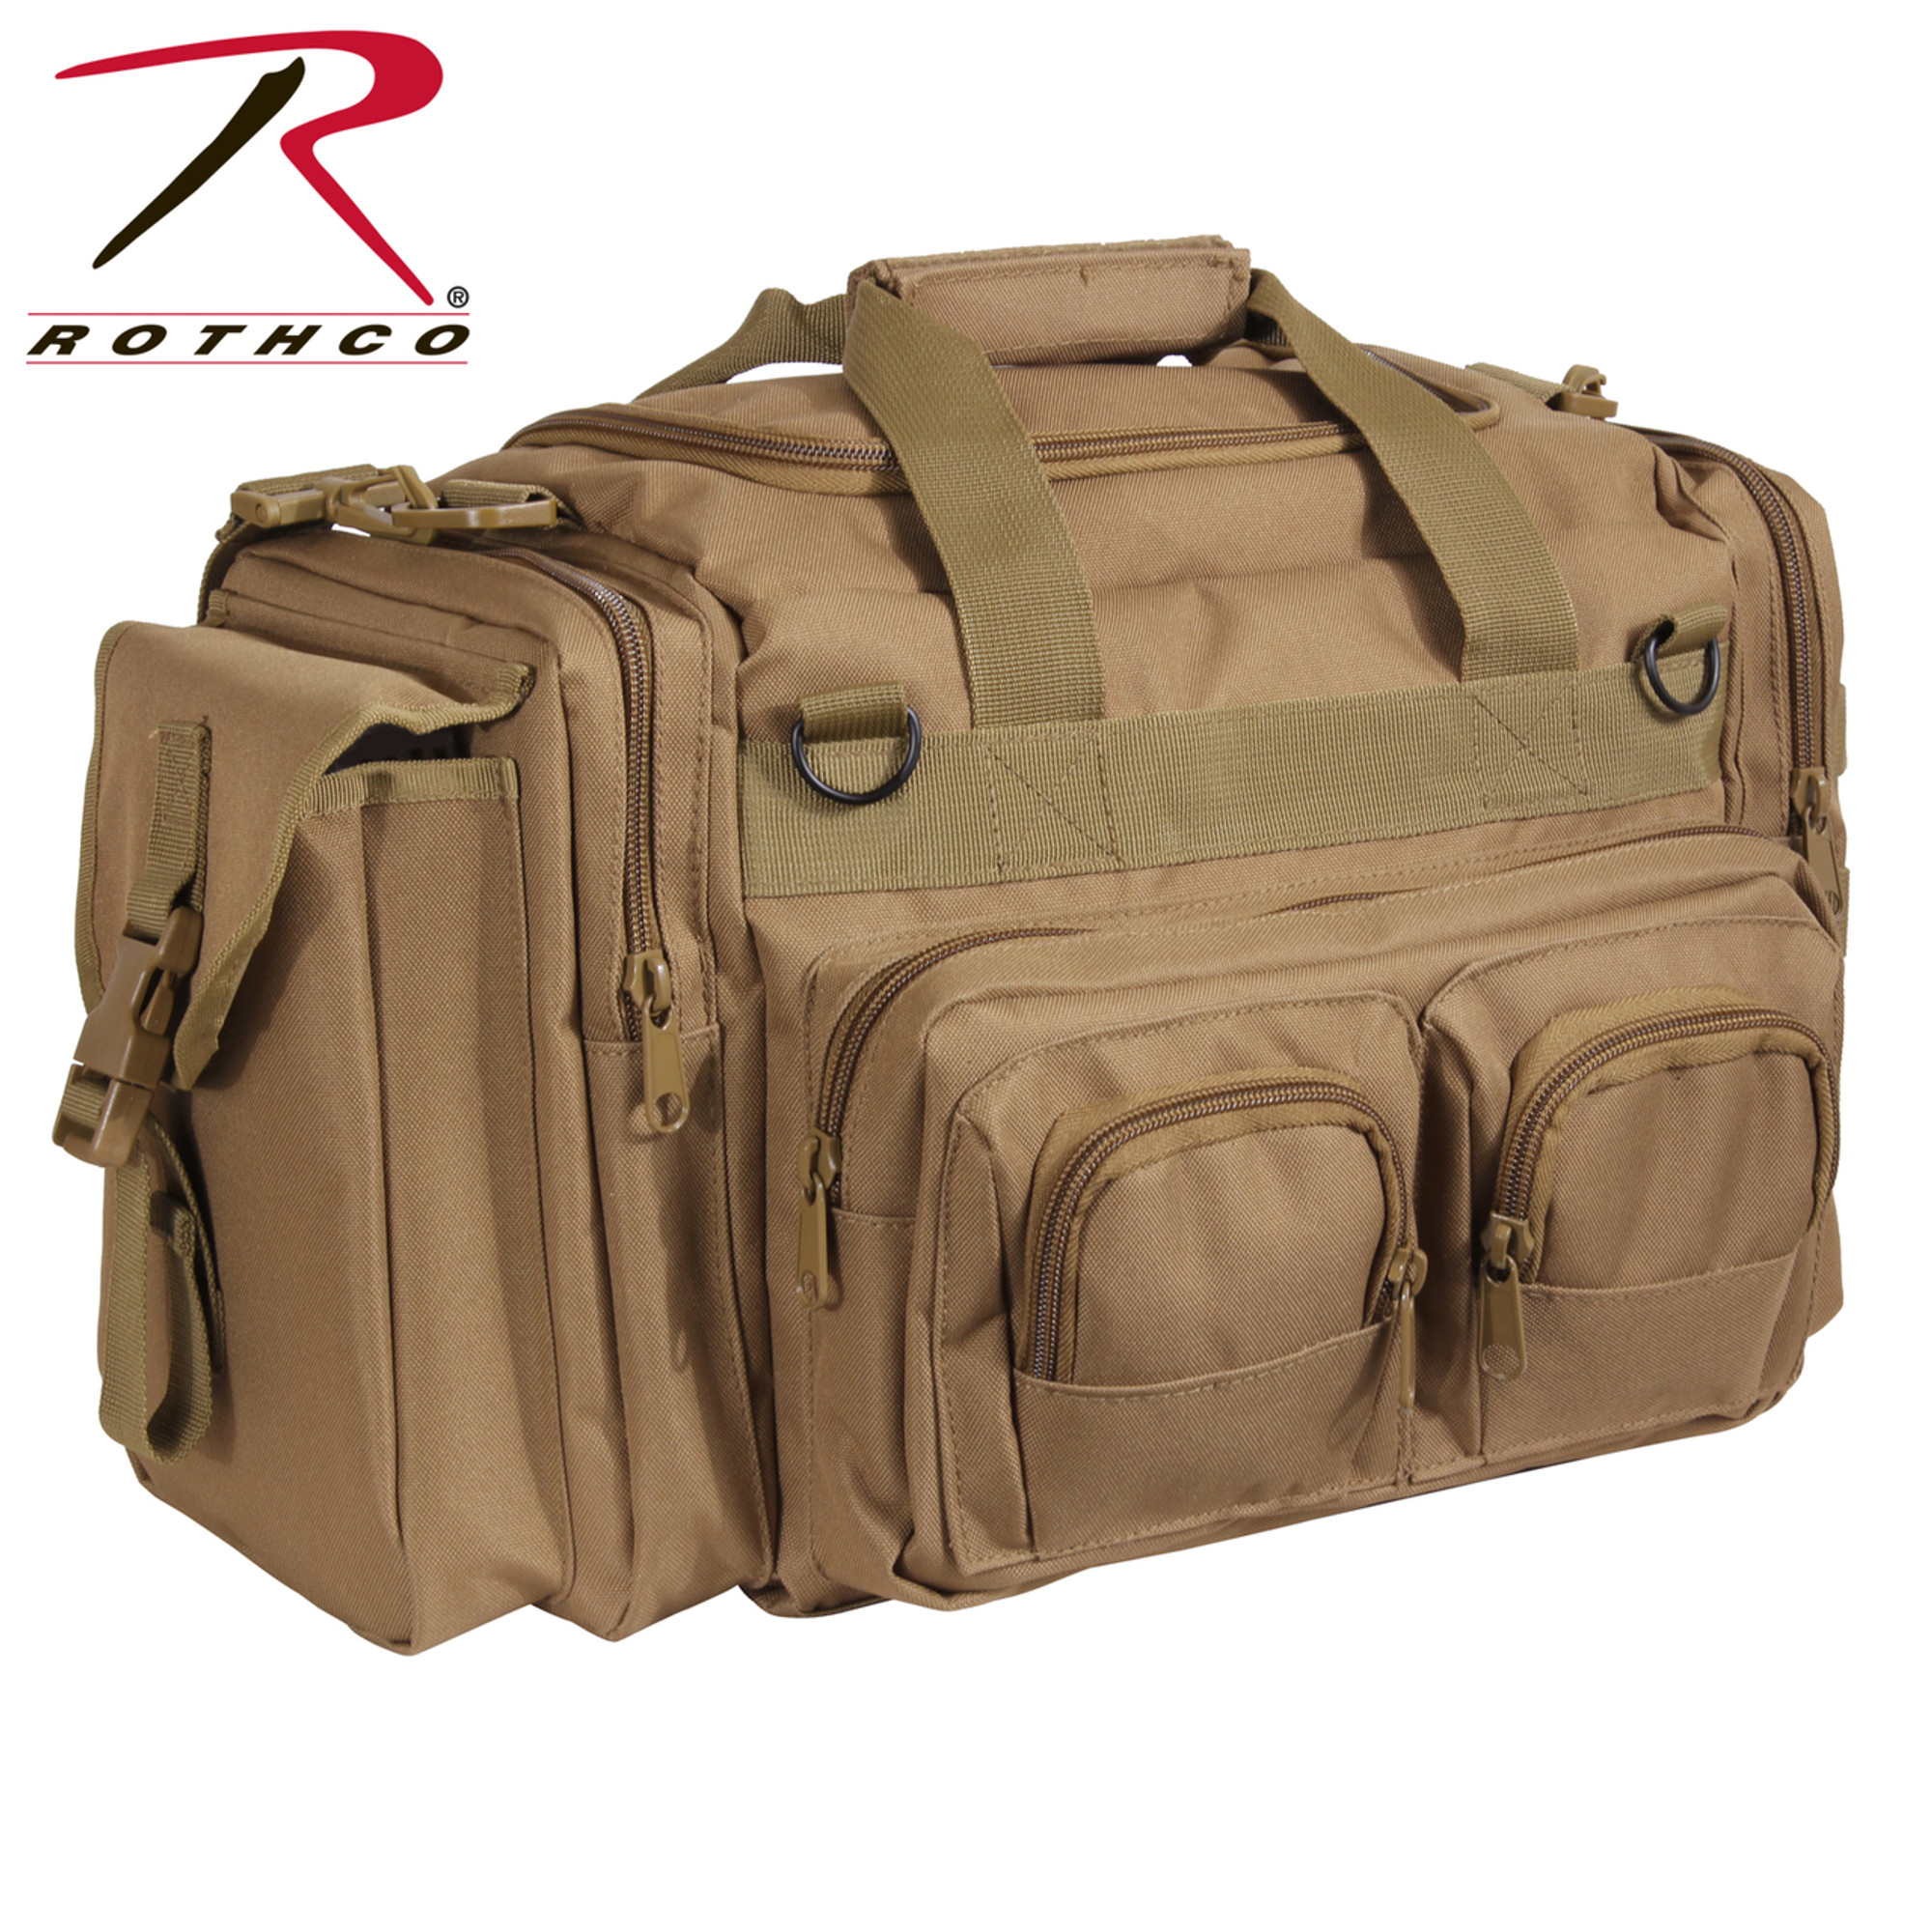 Rothco Concealed Carry Bag - Coyote Brown